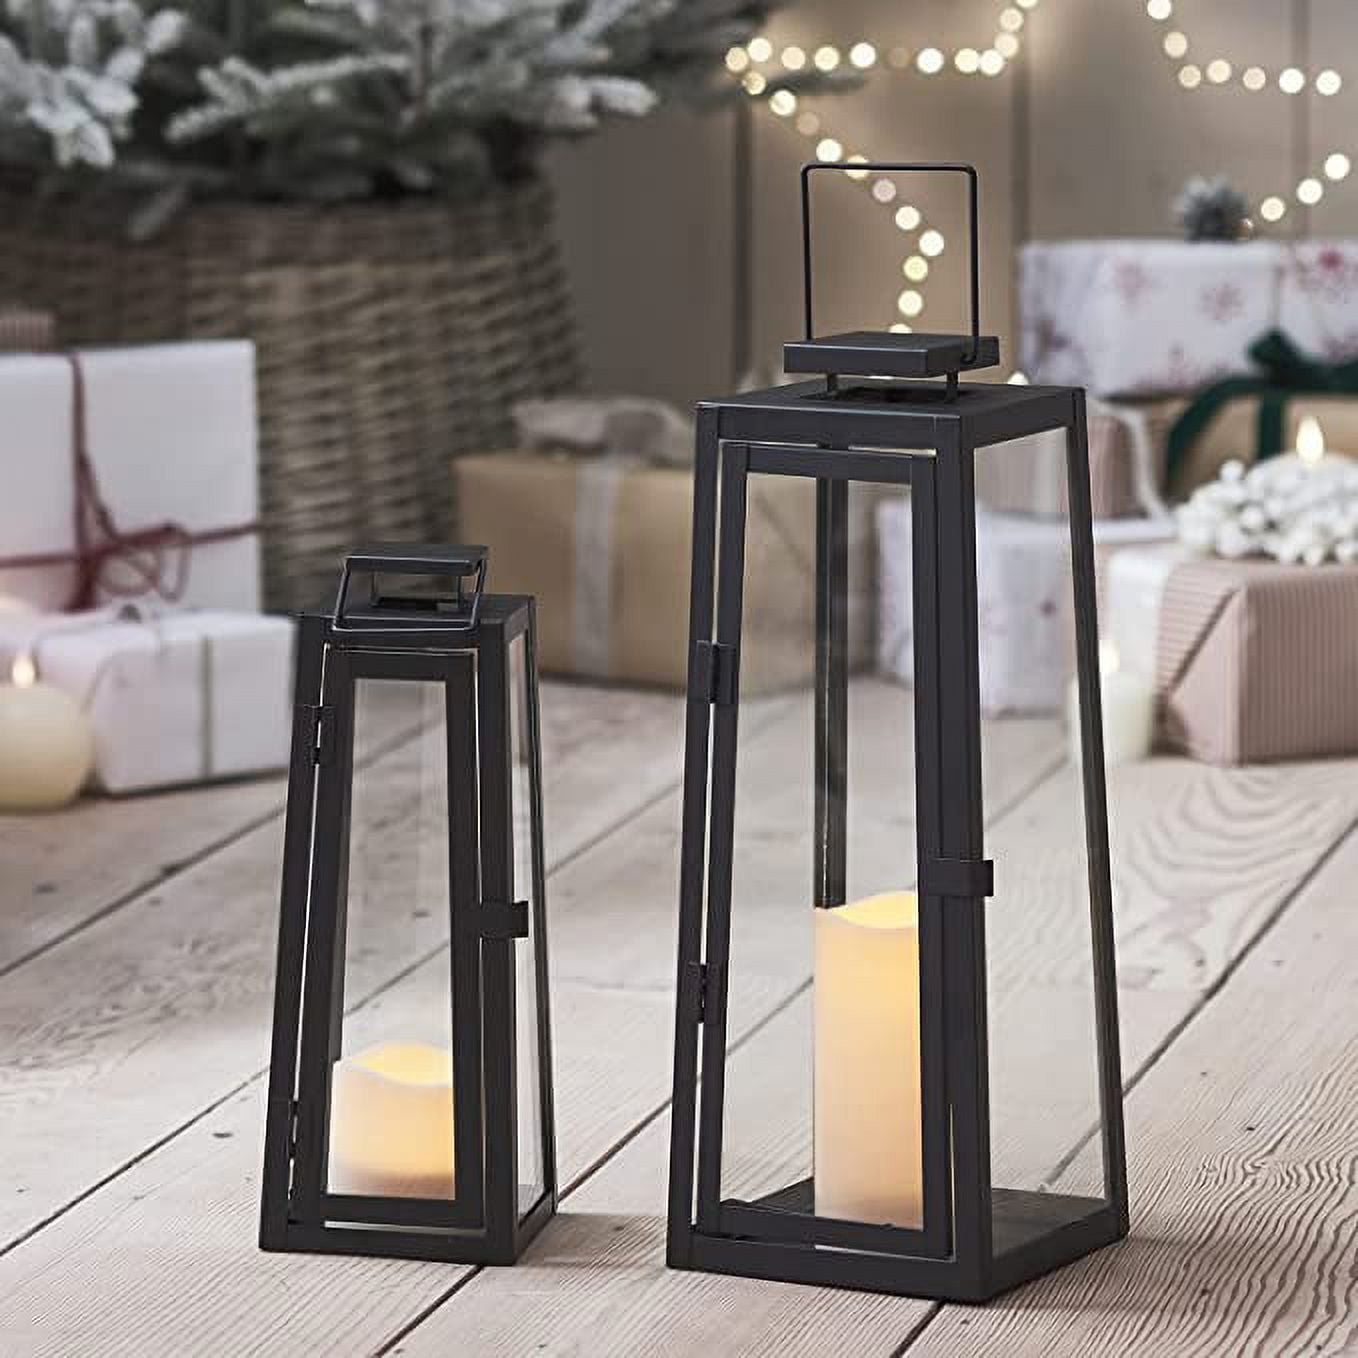 Lights4fun, Inc. Trio of Black Metal Moroccan Indoor Battery Operated LED  Flameless Candle Lanterns with Colored Glass